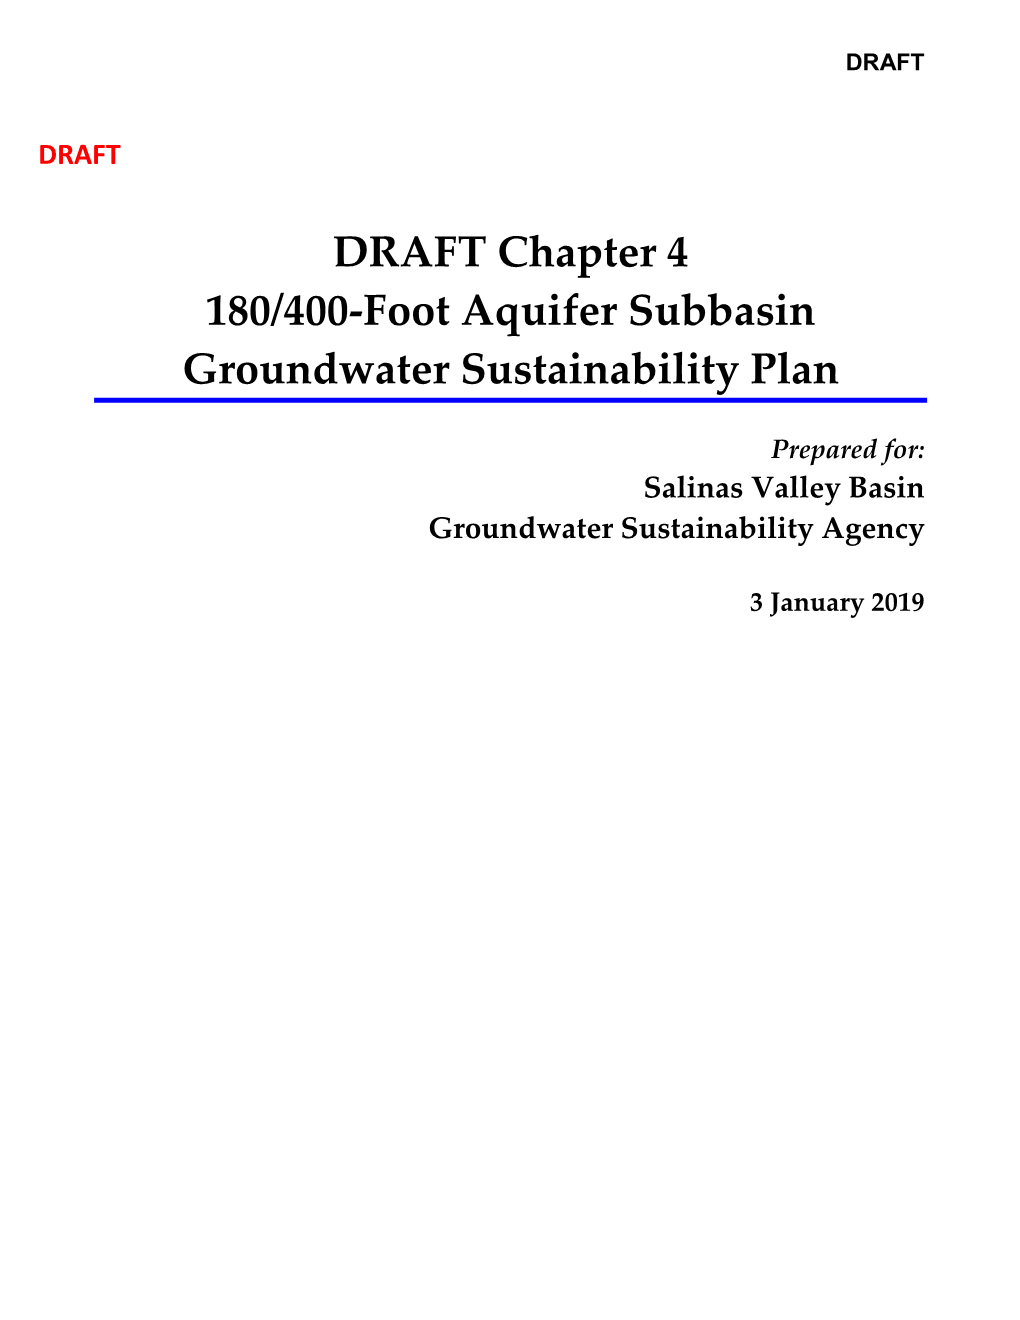 DRAFT Chapter 4 180/400-Foot Aquifer Subbasin Groundwater Sustainability Plan